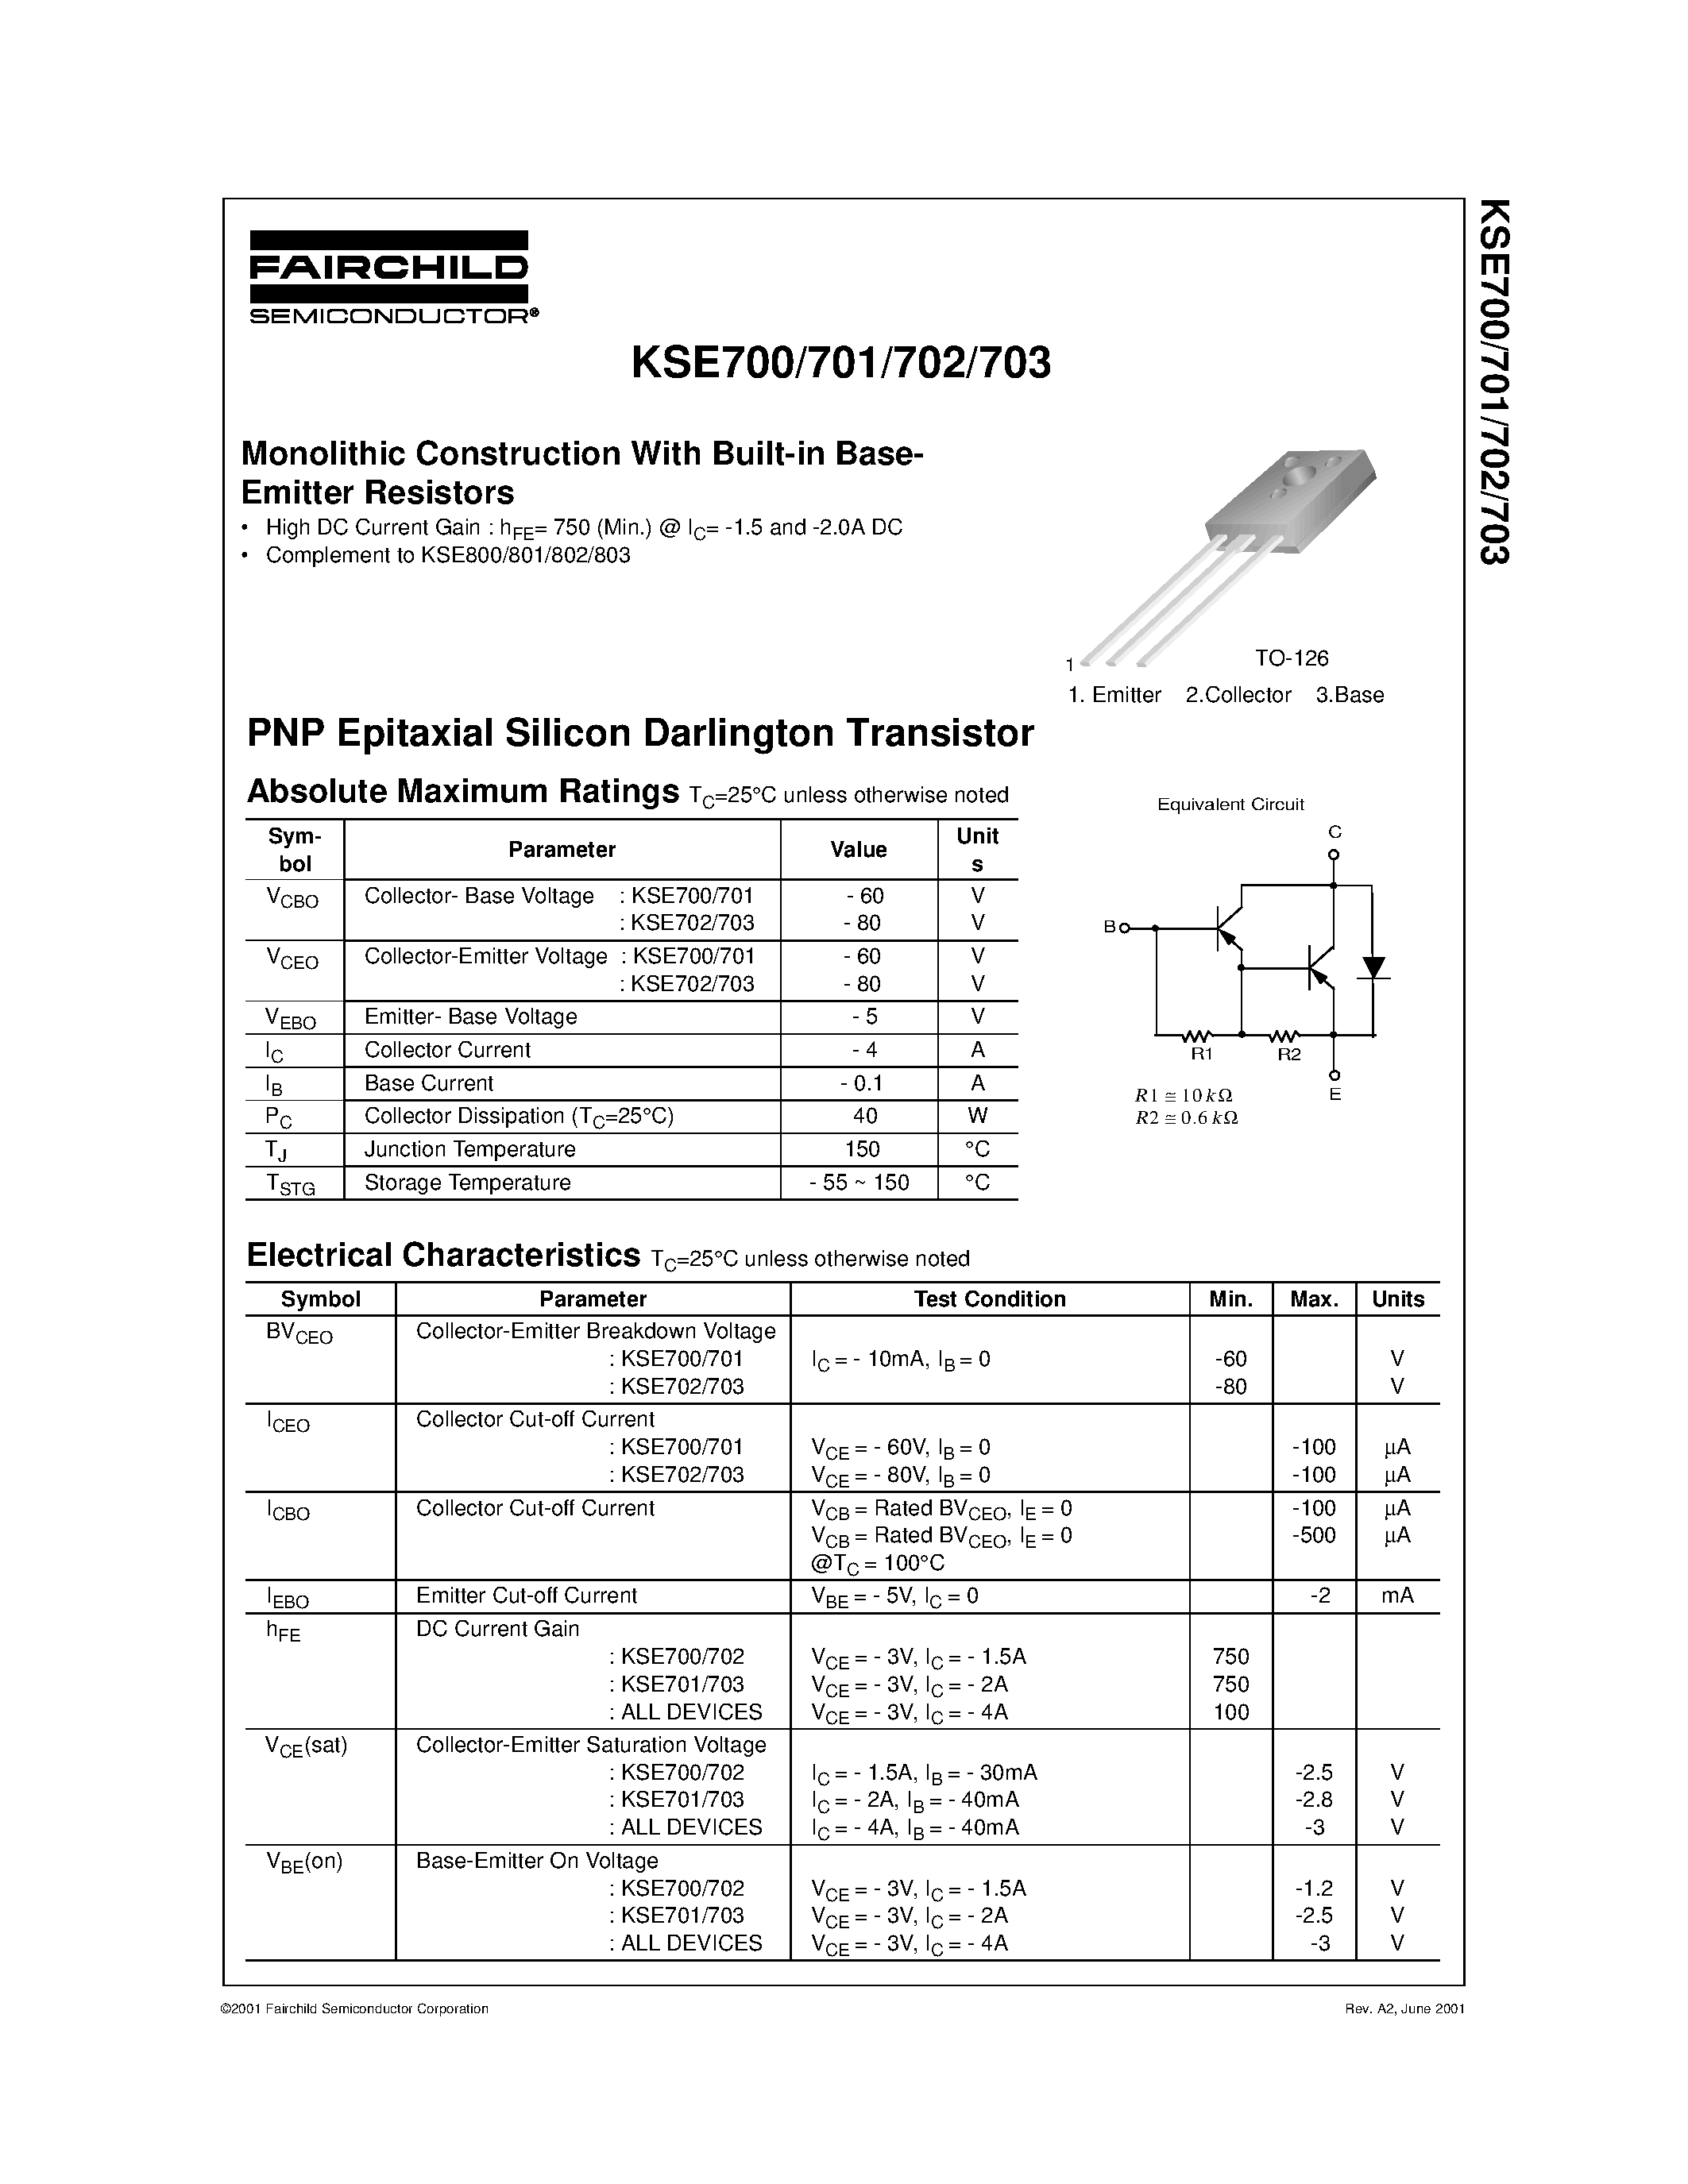 Даташит KSE703 - Monolithic Construction With Built-in Base- Emitter Resistors страница 1